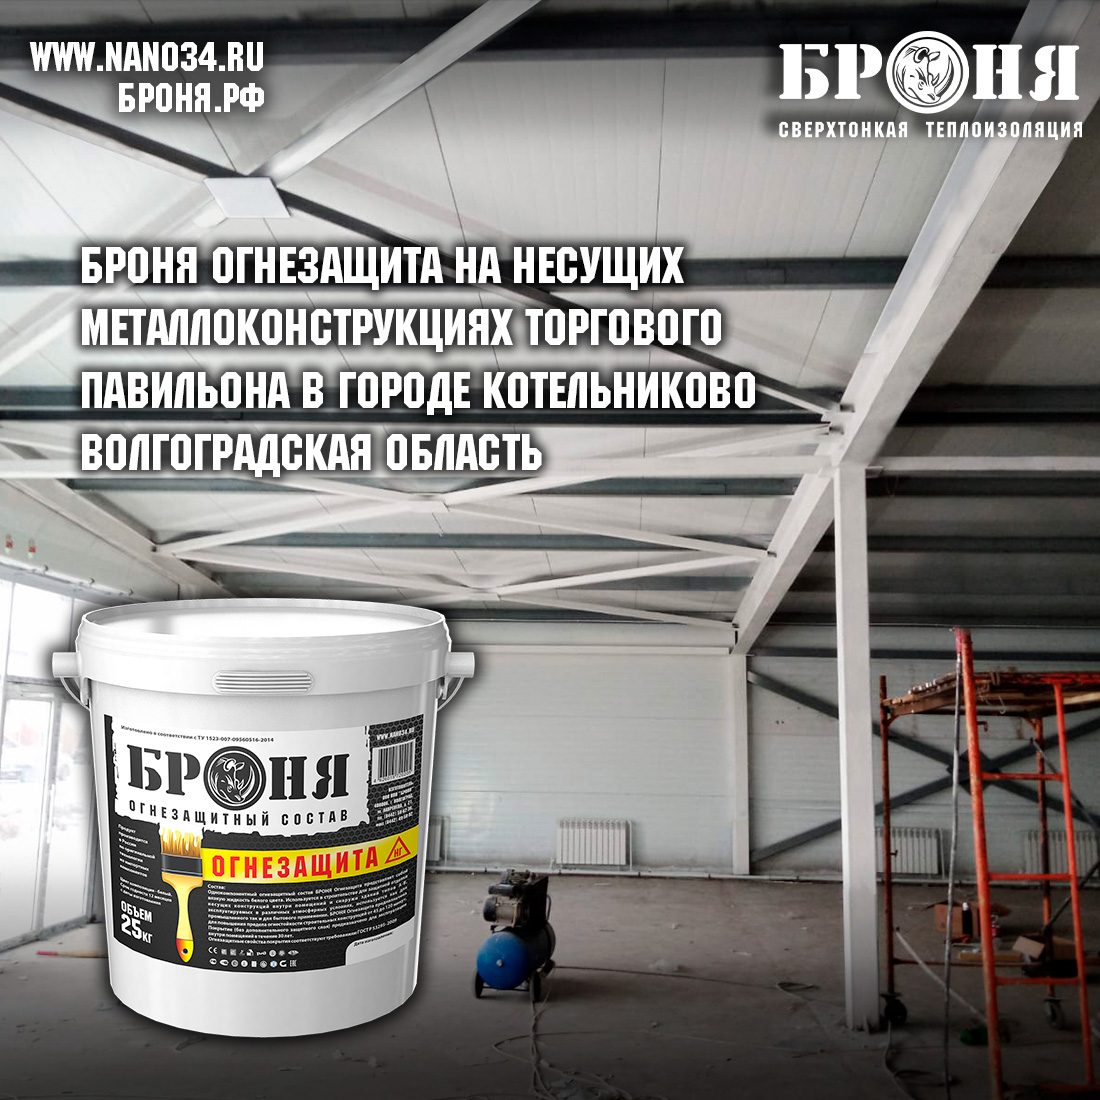 The application of Bronya Fire Protection on load-bearing metal structures of the trade pavilion in Kotelnikovo, Volgograd region (photo)